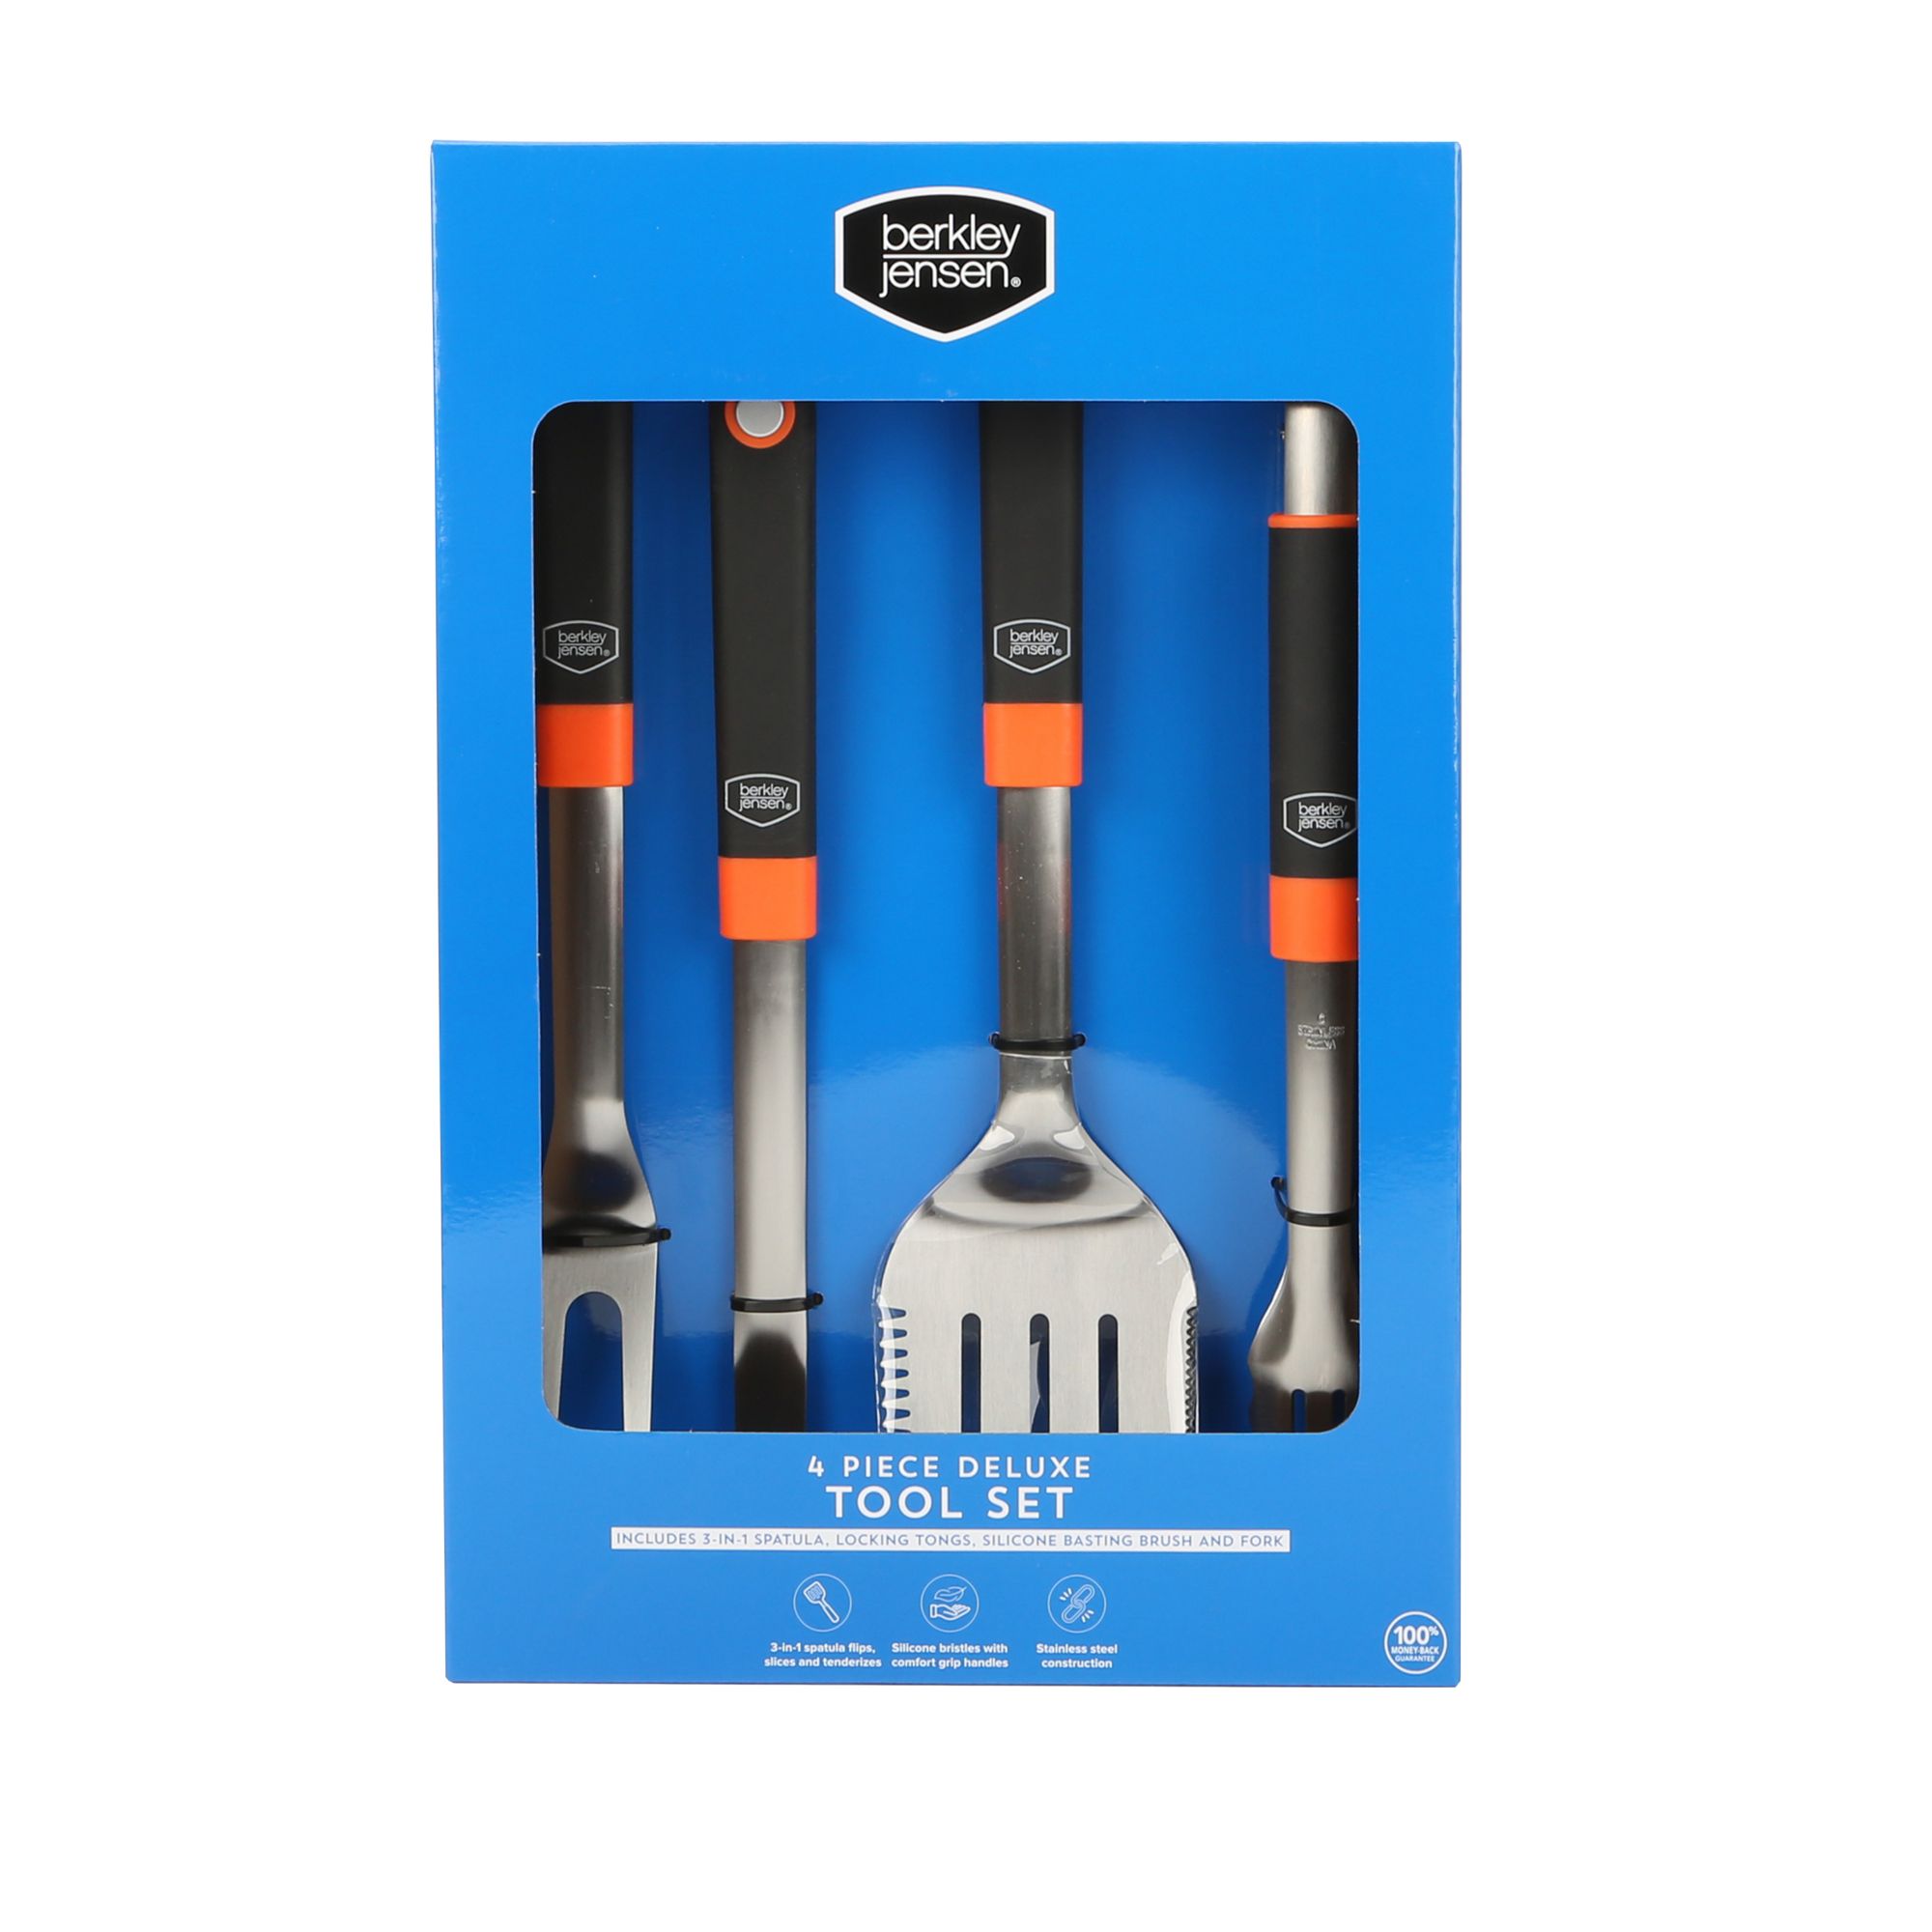 4pc BBQ Tool Utensil Set, Stainless Steel by Pure Grill - Silver - Bed Bath  & Beyond - 31411552